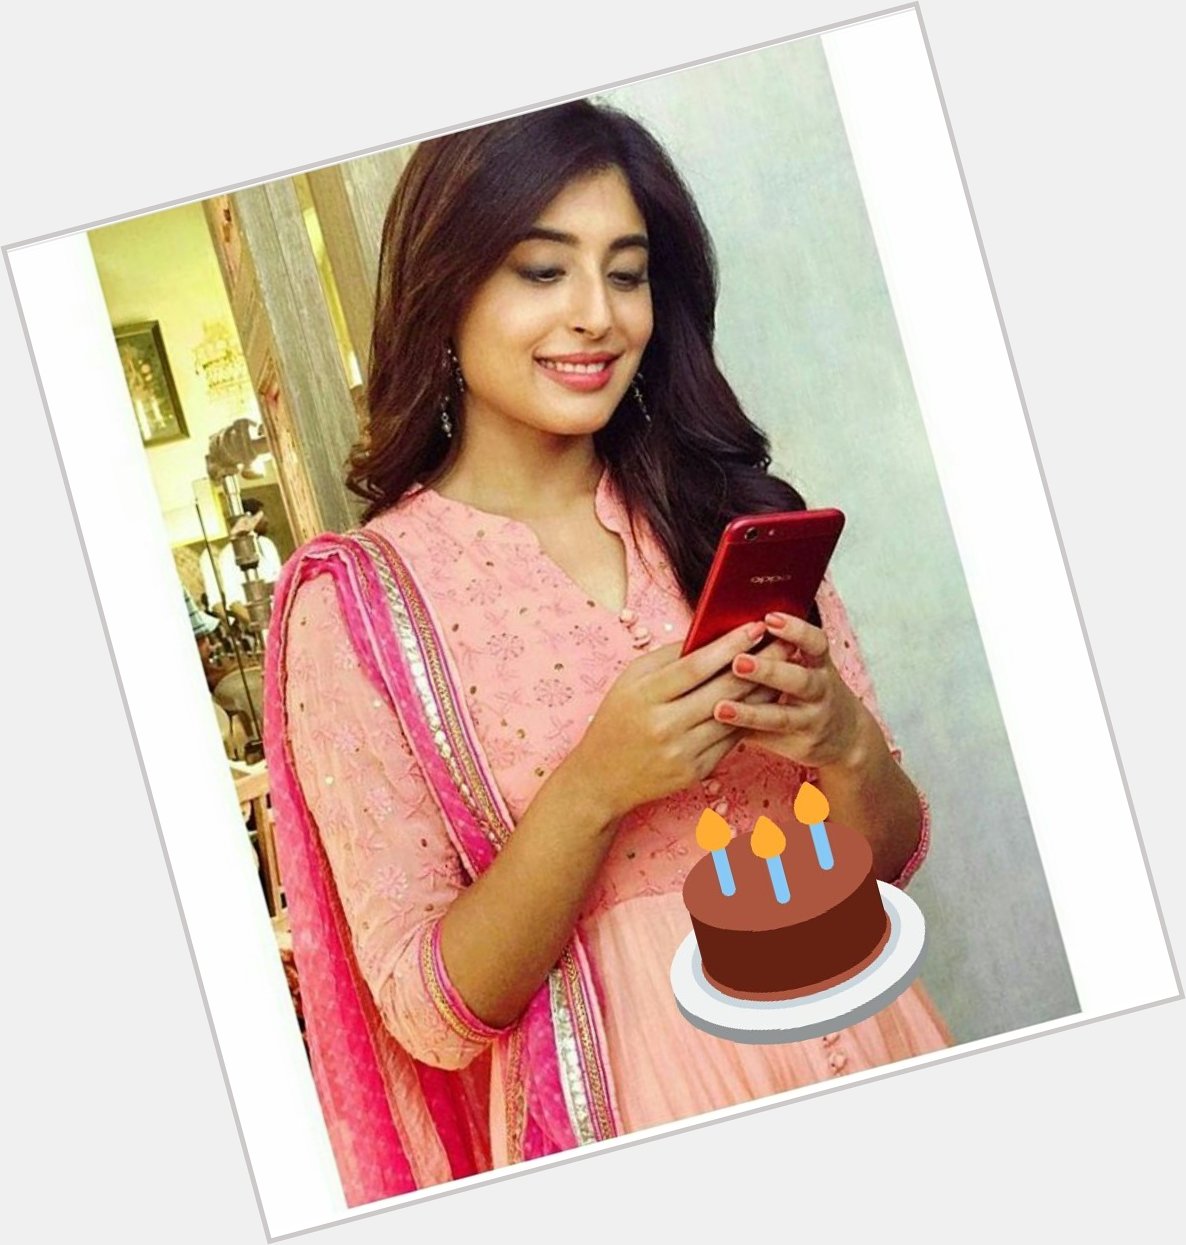  Wishing you a very Happy Birthday I wish your all dreams come true lots of love  